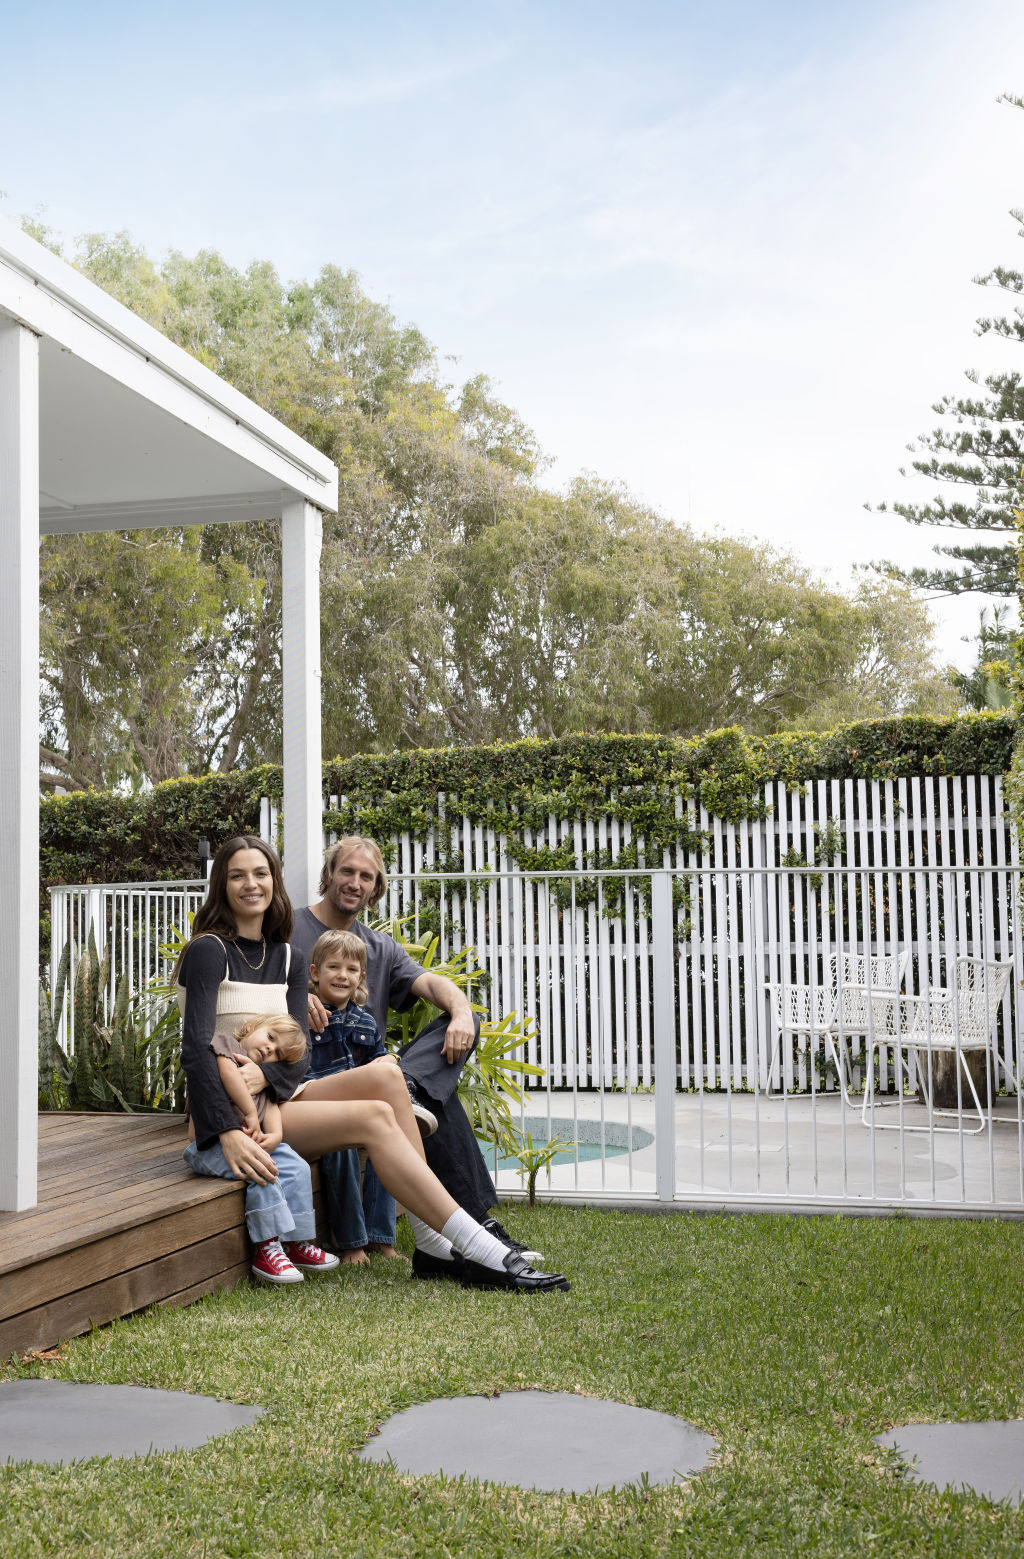 Kita Alexander and Owen Wright with their children, Vali and Rumi, at their property close to Belongil Beach. Photo: Louise Roche - The Design Villa